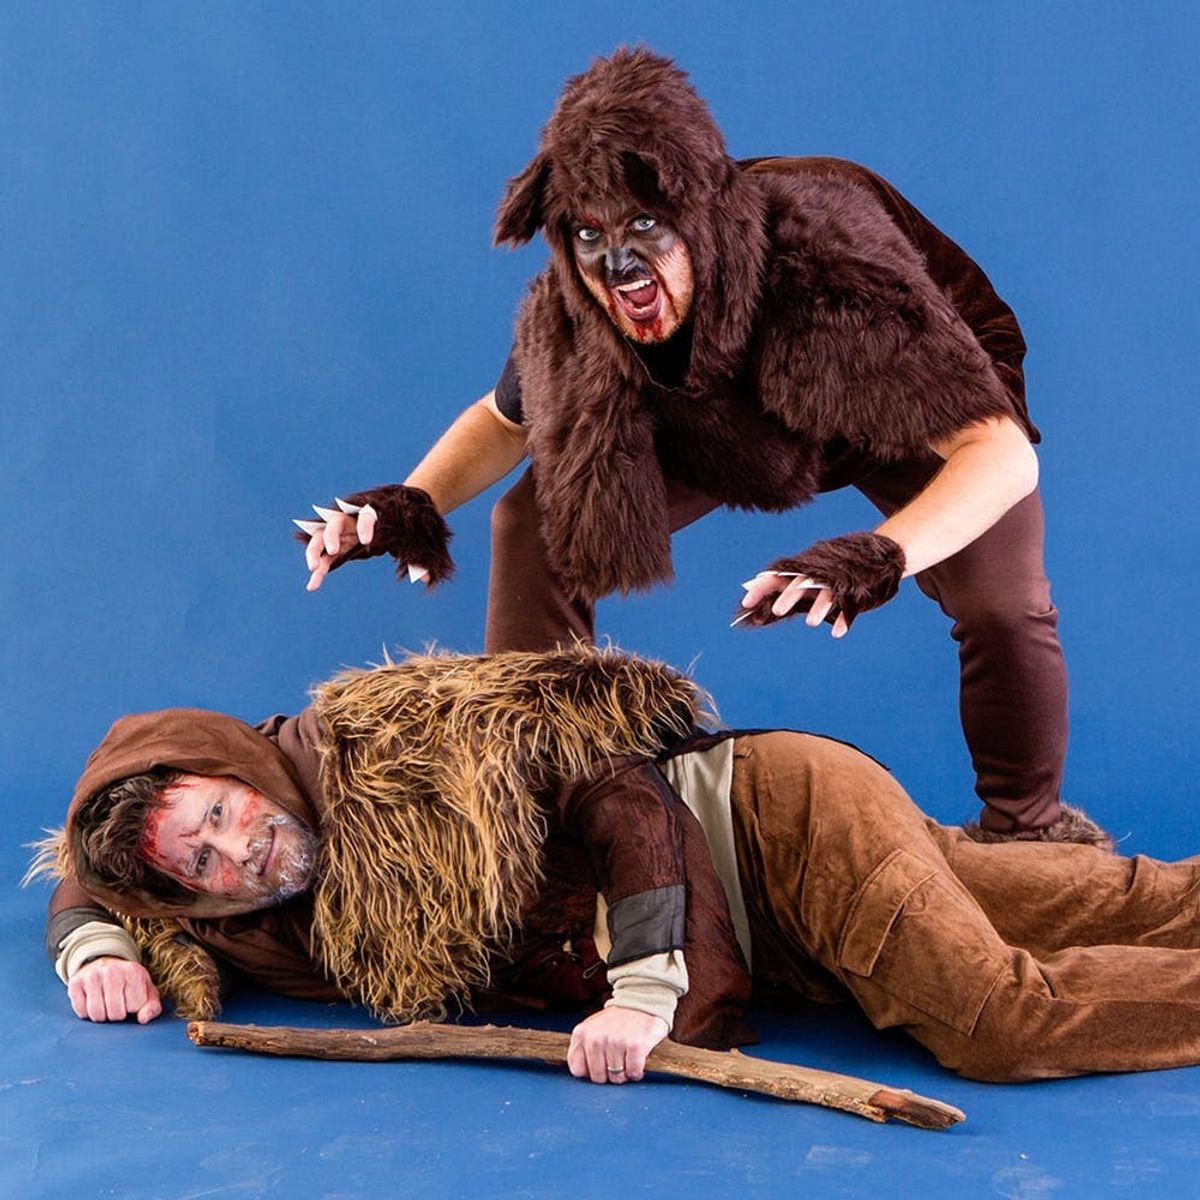 This Revenant Costume Is the Answer to Your Halloween Costume Dilemma